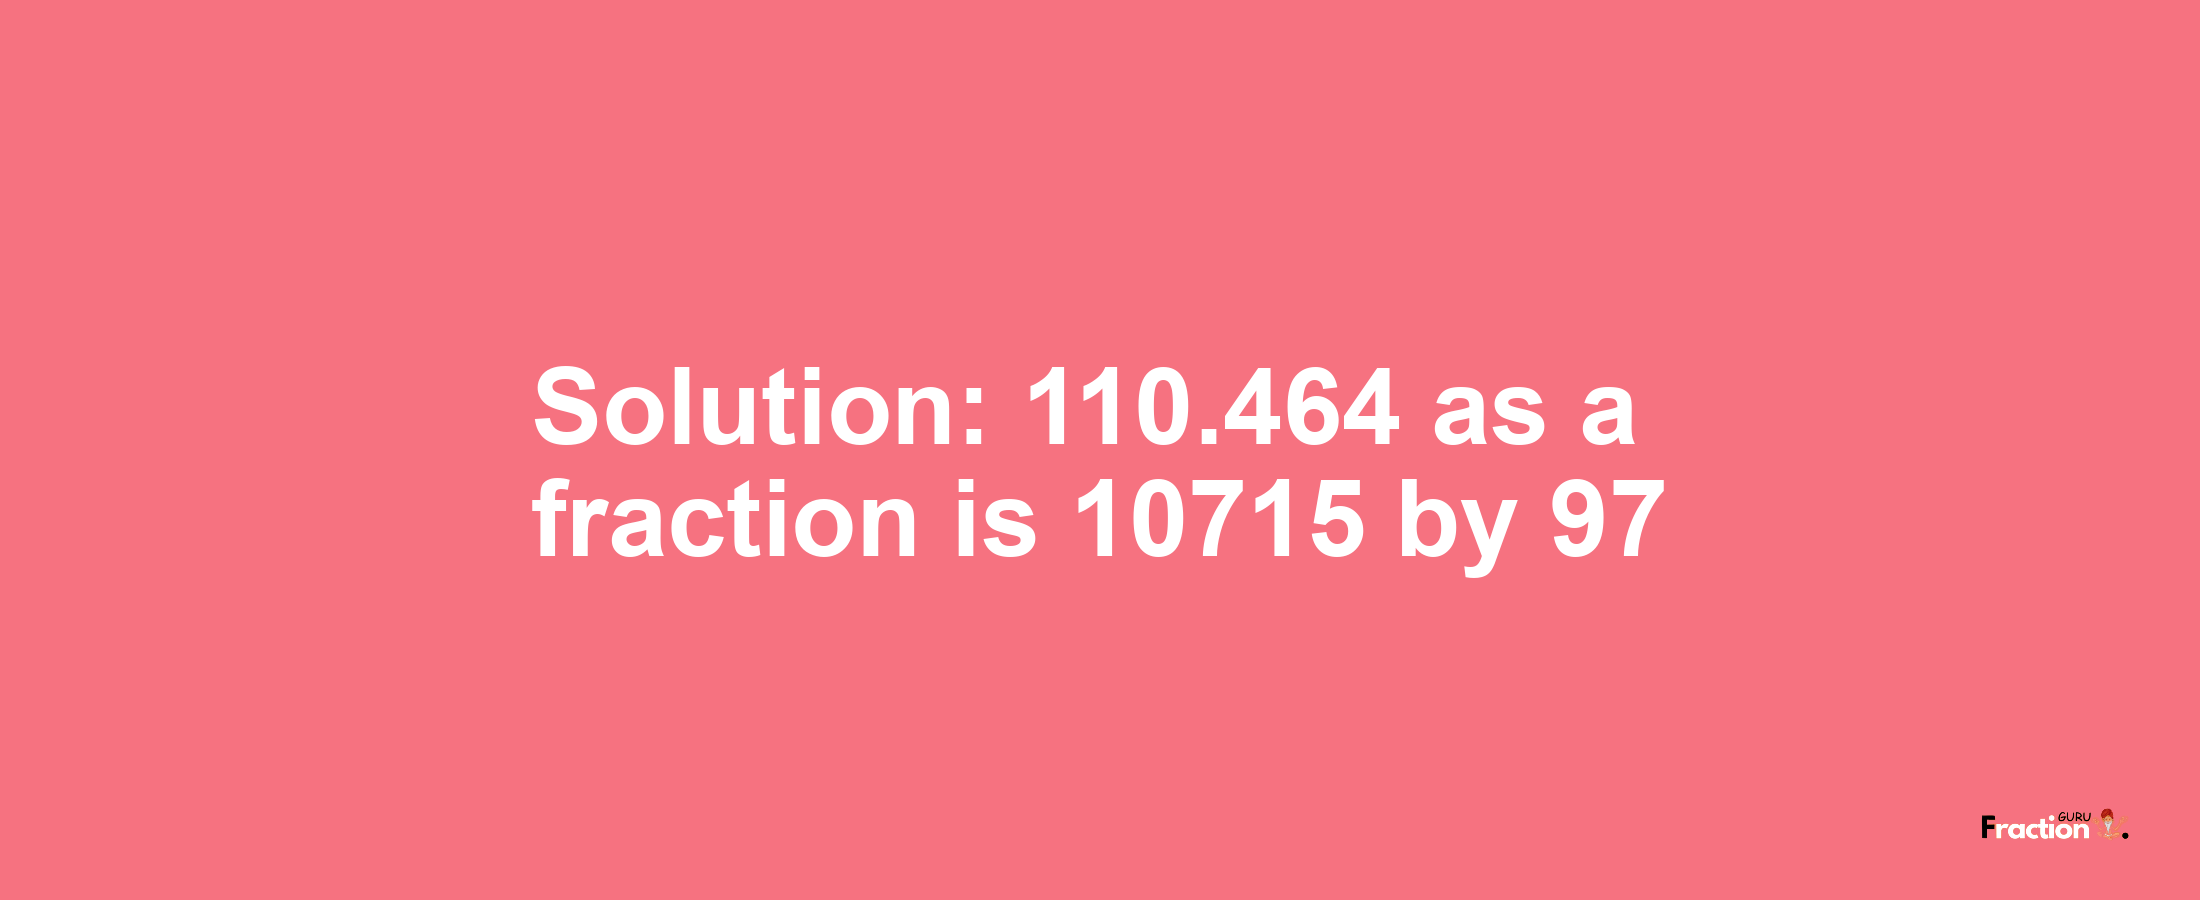 Solution:110.464 as a fraction is 10715/97